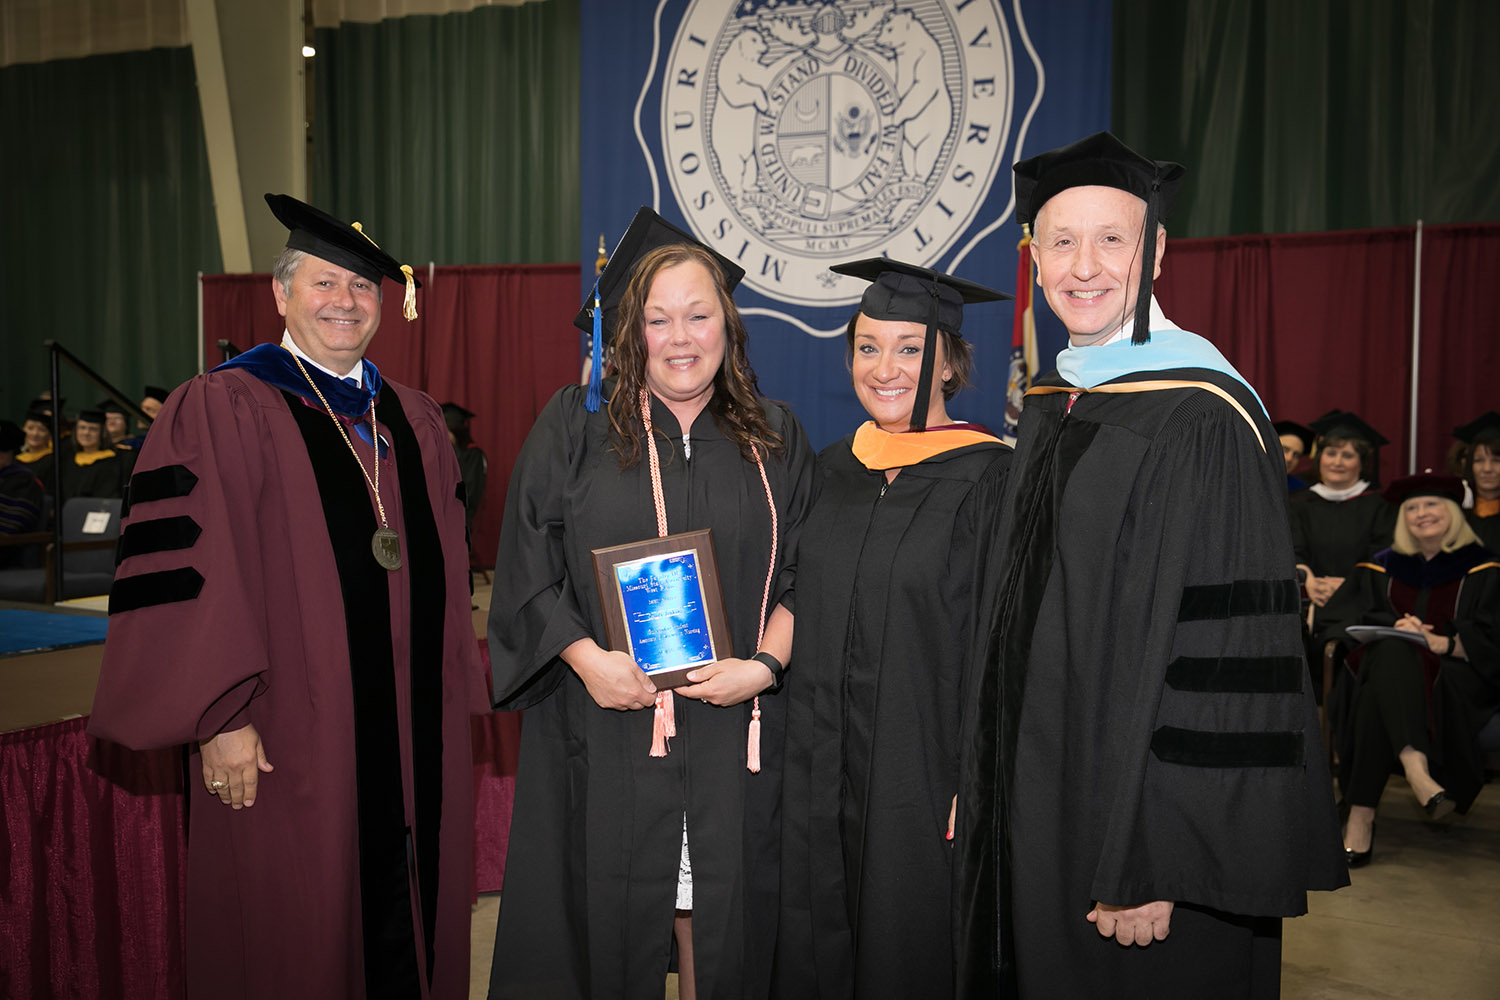 LAURA JENKINS, West Plains, received the Outstanding Student Award for Associate of Science in Nursing degree graduates at Missouri State University-West Plains’ commencement ceremonies Saturday, May 20, at the West Plains Civic Center. The award recognizes a graduate from ASN program who exhibits academic achievement and honesty, class participation, conscientiousness, university and community service, and outstanding clinical performance. From left above are Missouri State-West Plains Chancellor Drew Bennett, Jenkins, Director of Nursing Amy Ackerson and Dean of Academic Affairs Dr. Dennis Lancaster. (Missouri State-West Plains Photo)